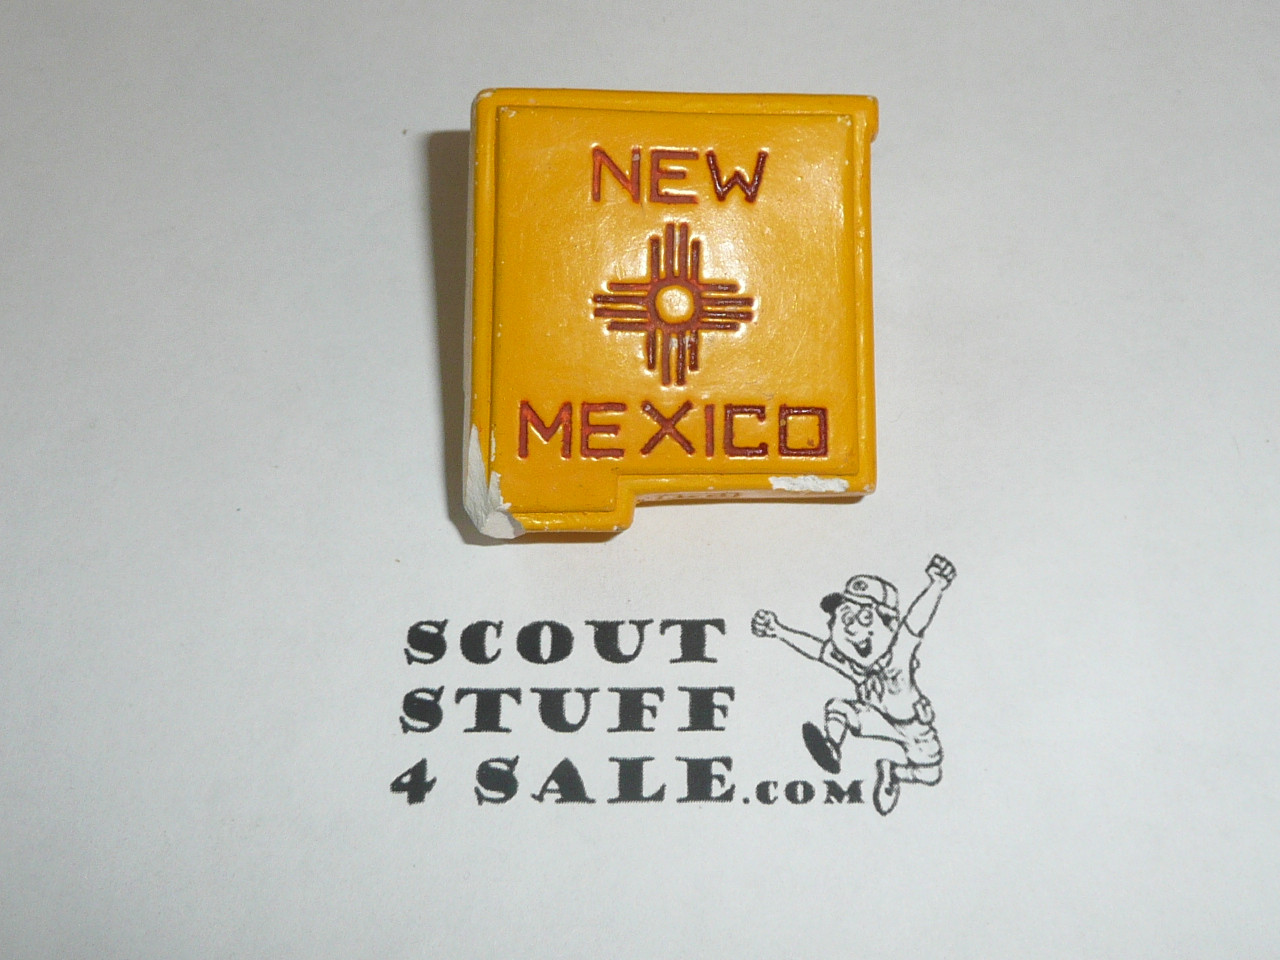 New Mexico Plaster Neckerchief Slide, Sold at Philmont, some wear